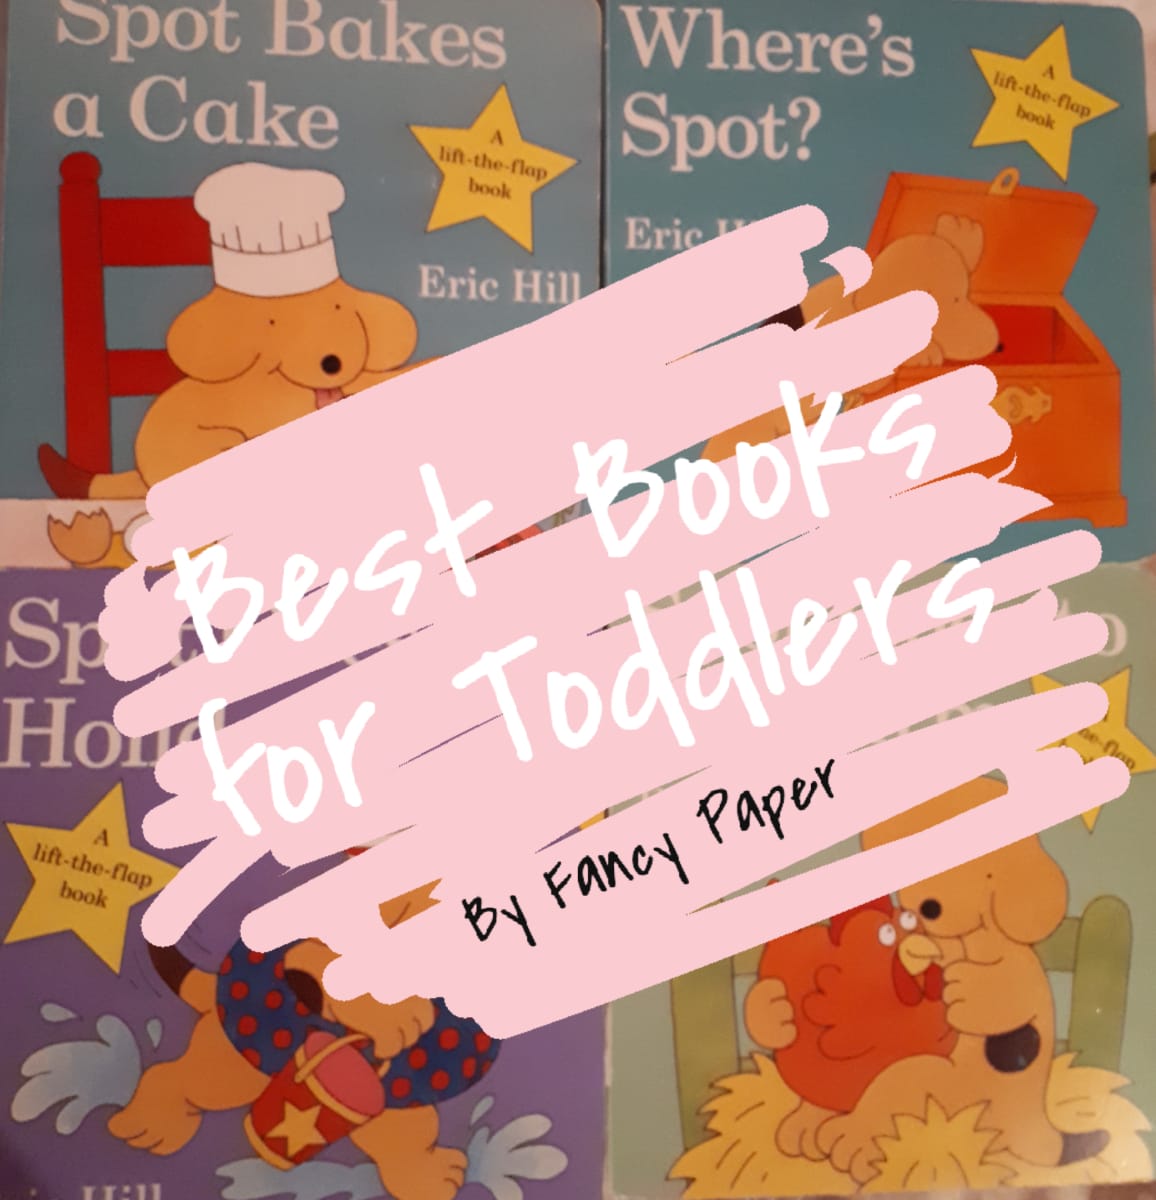 Best Books for Toddlers on World Book Day